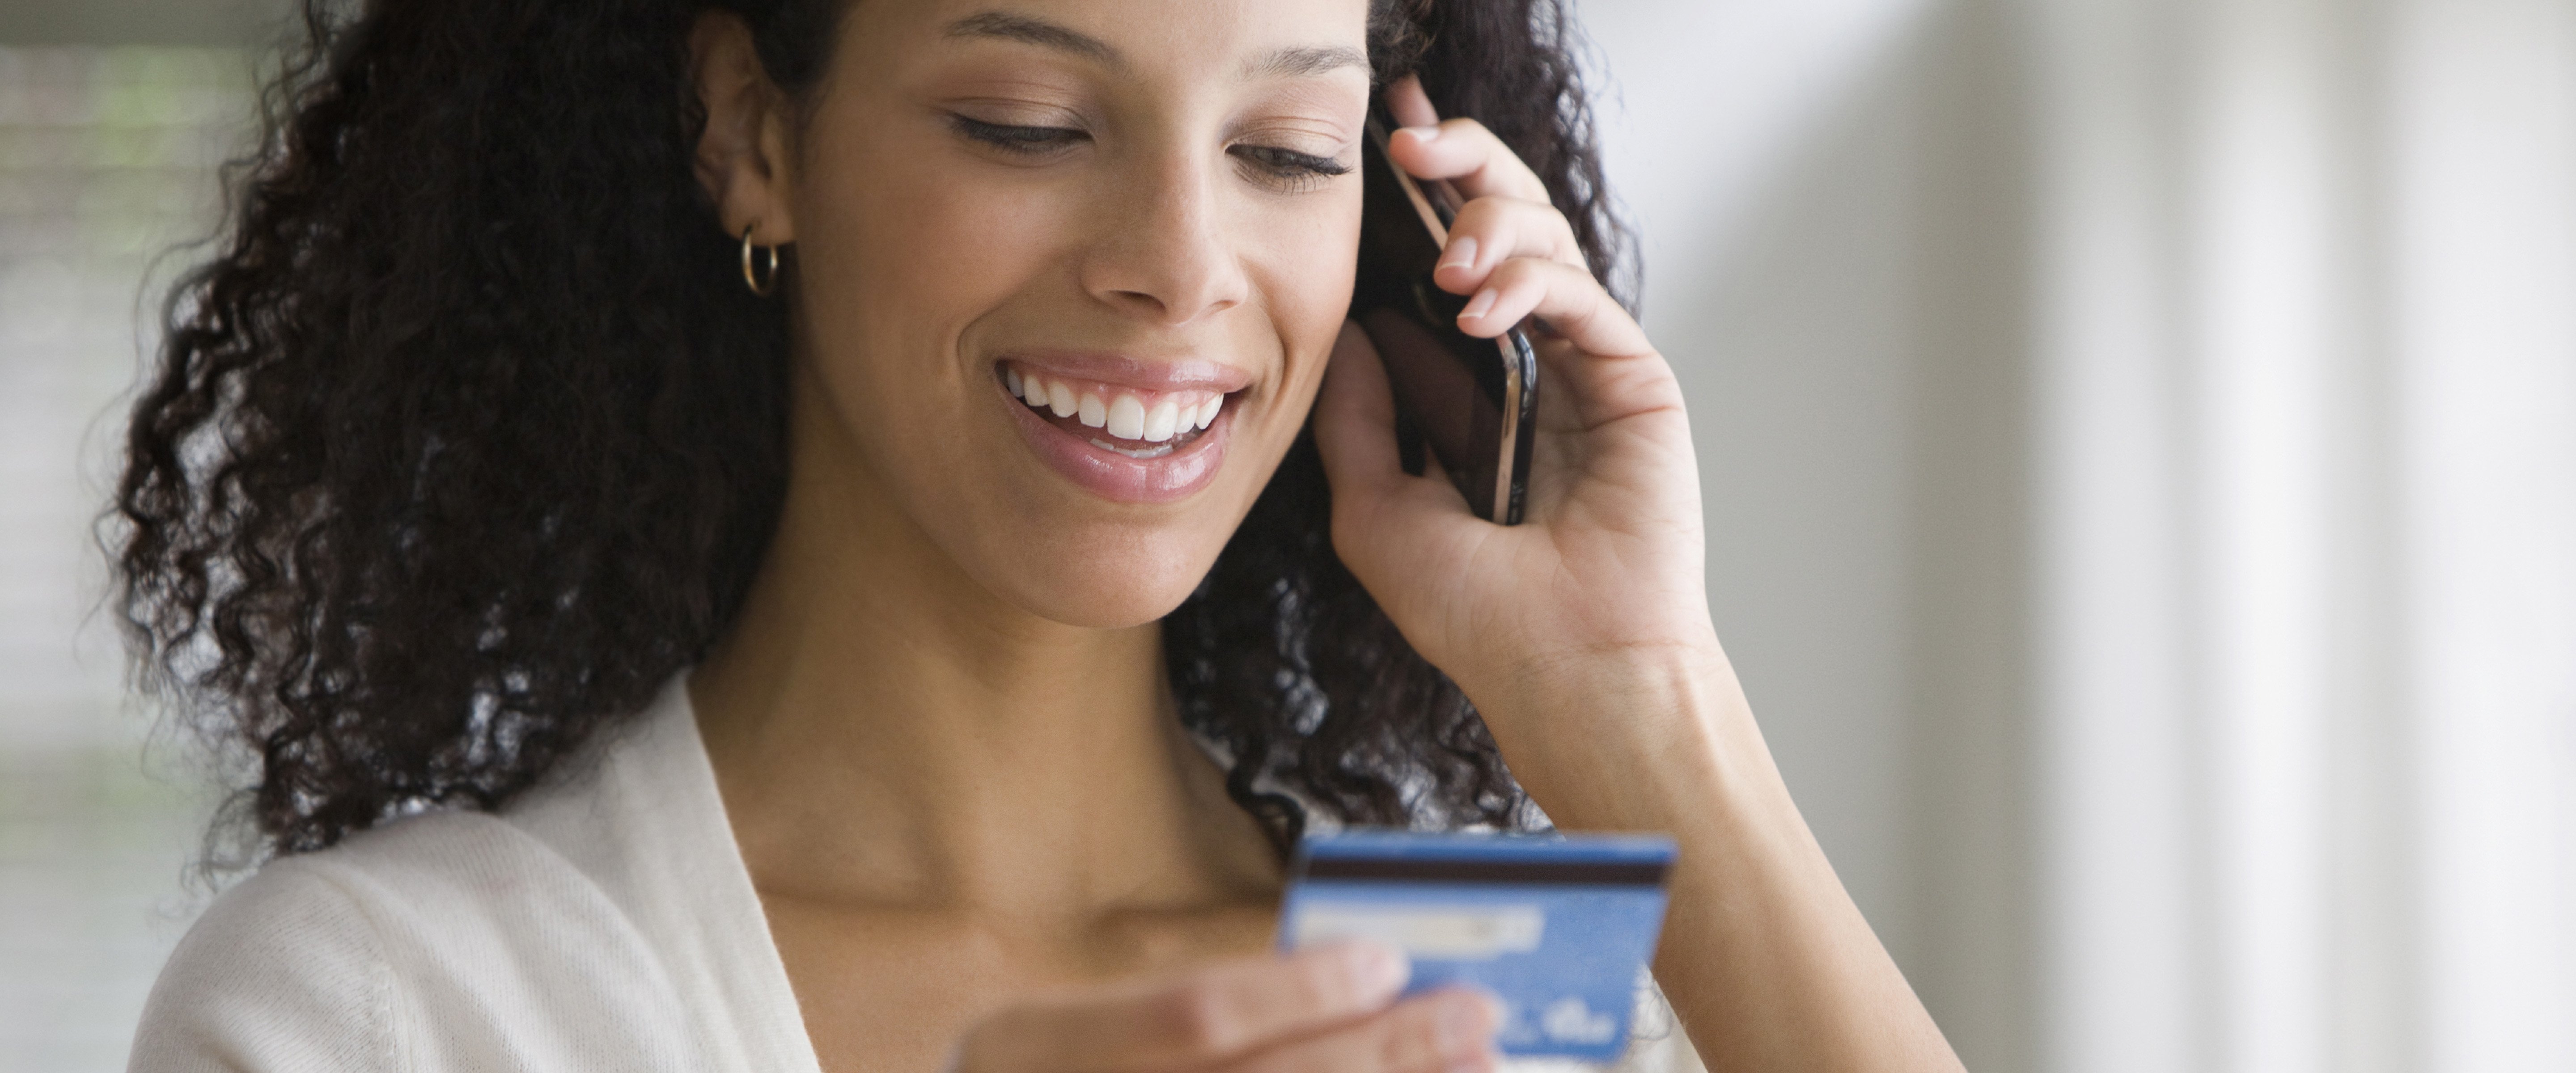 young woman on mobile phone using credit card